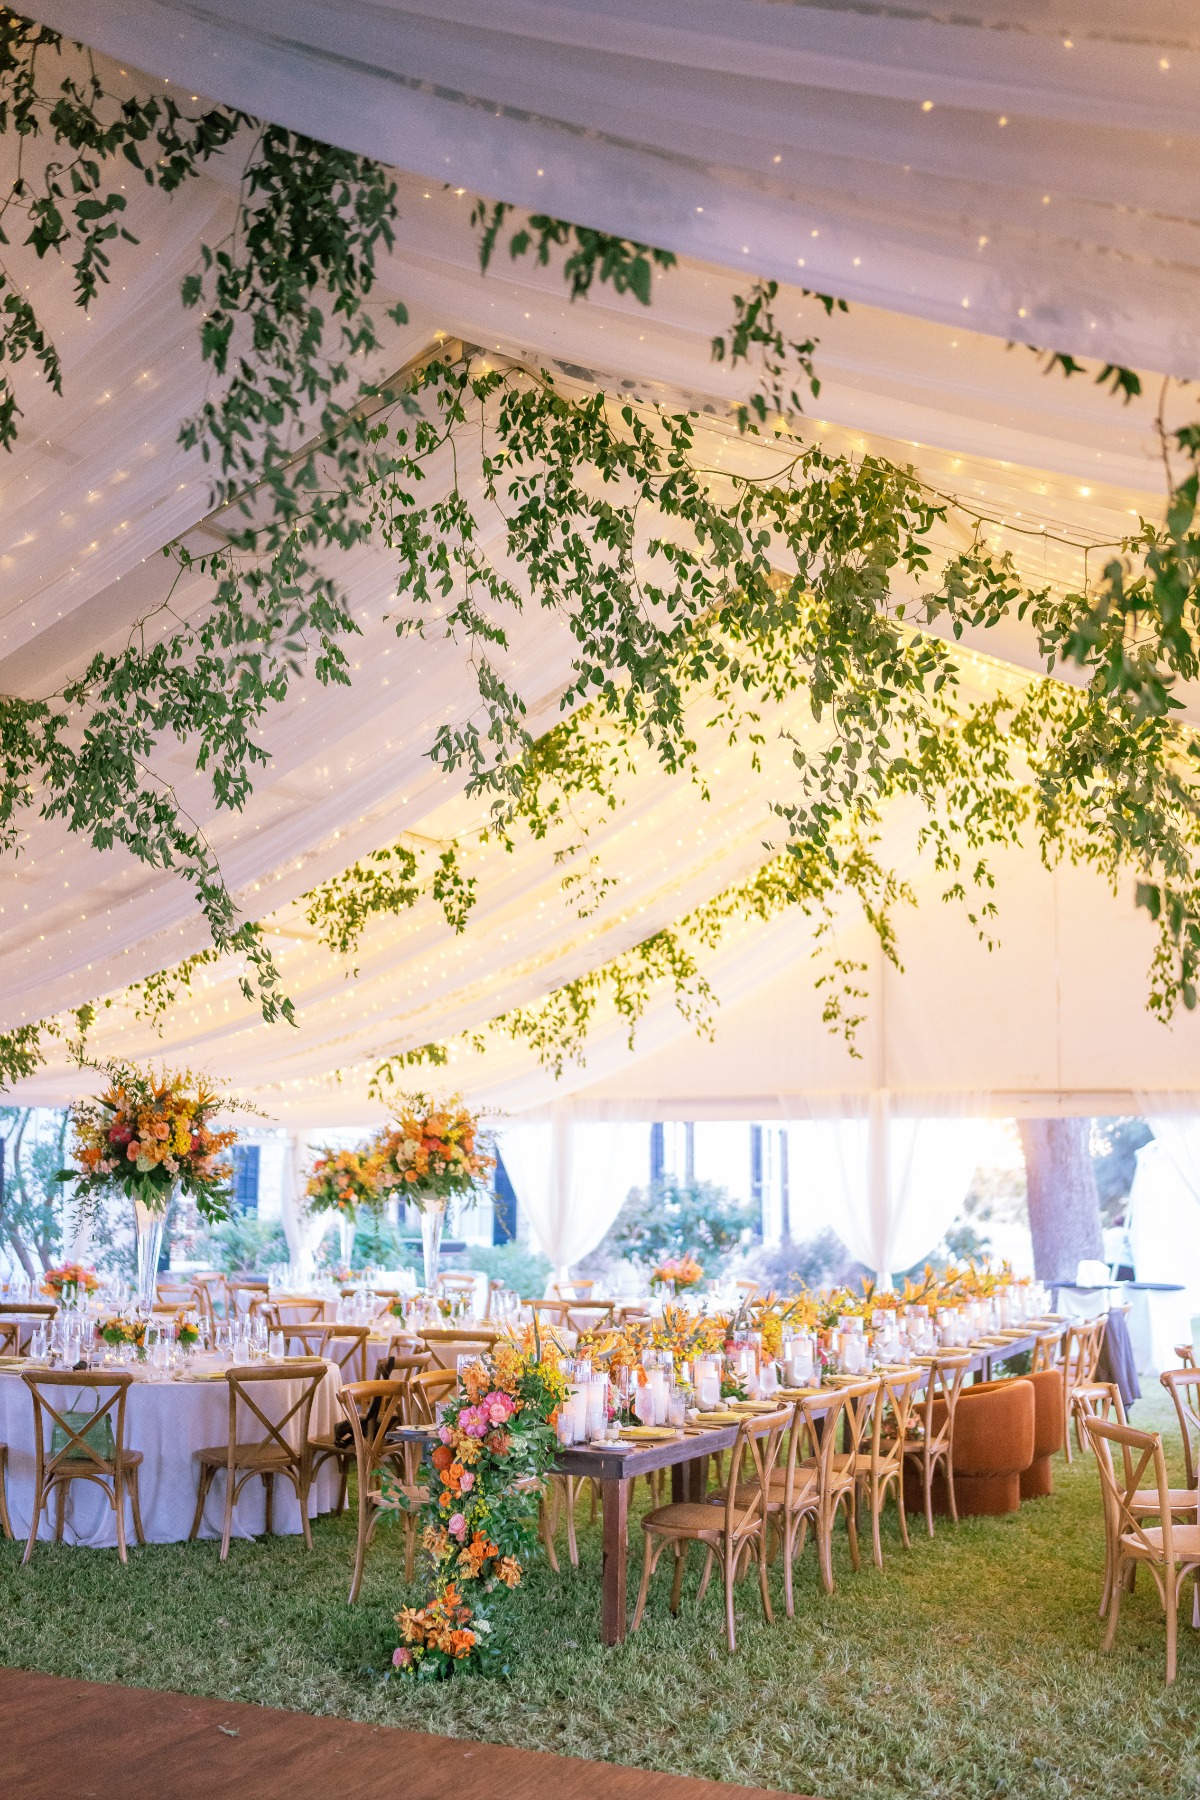 draped greenery for tent